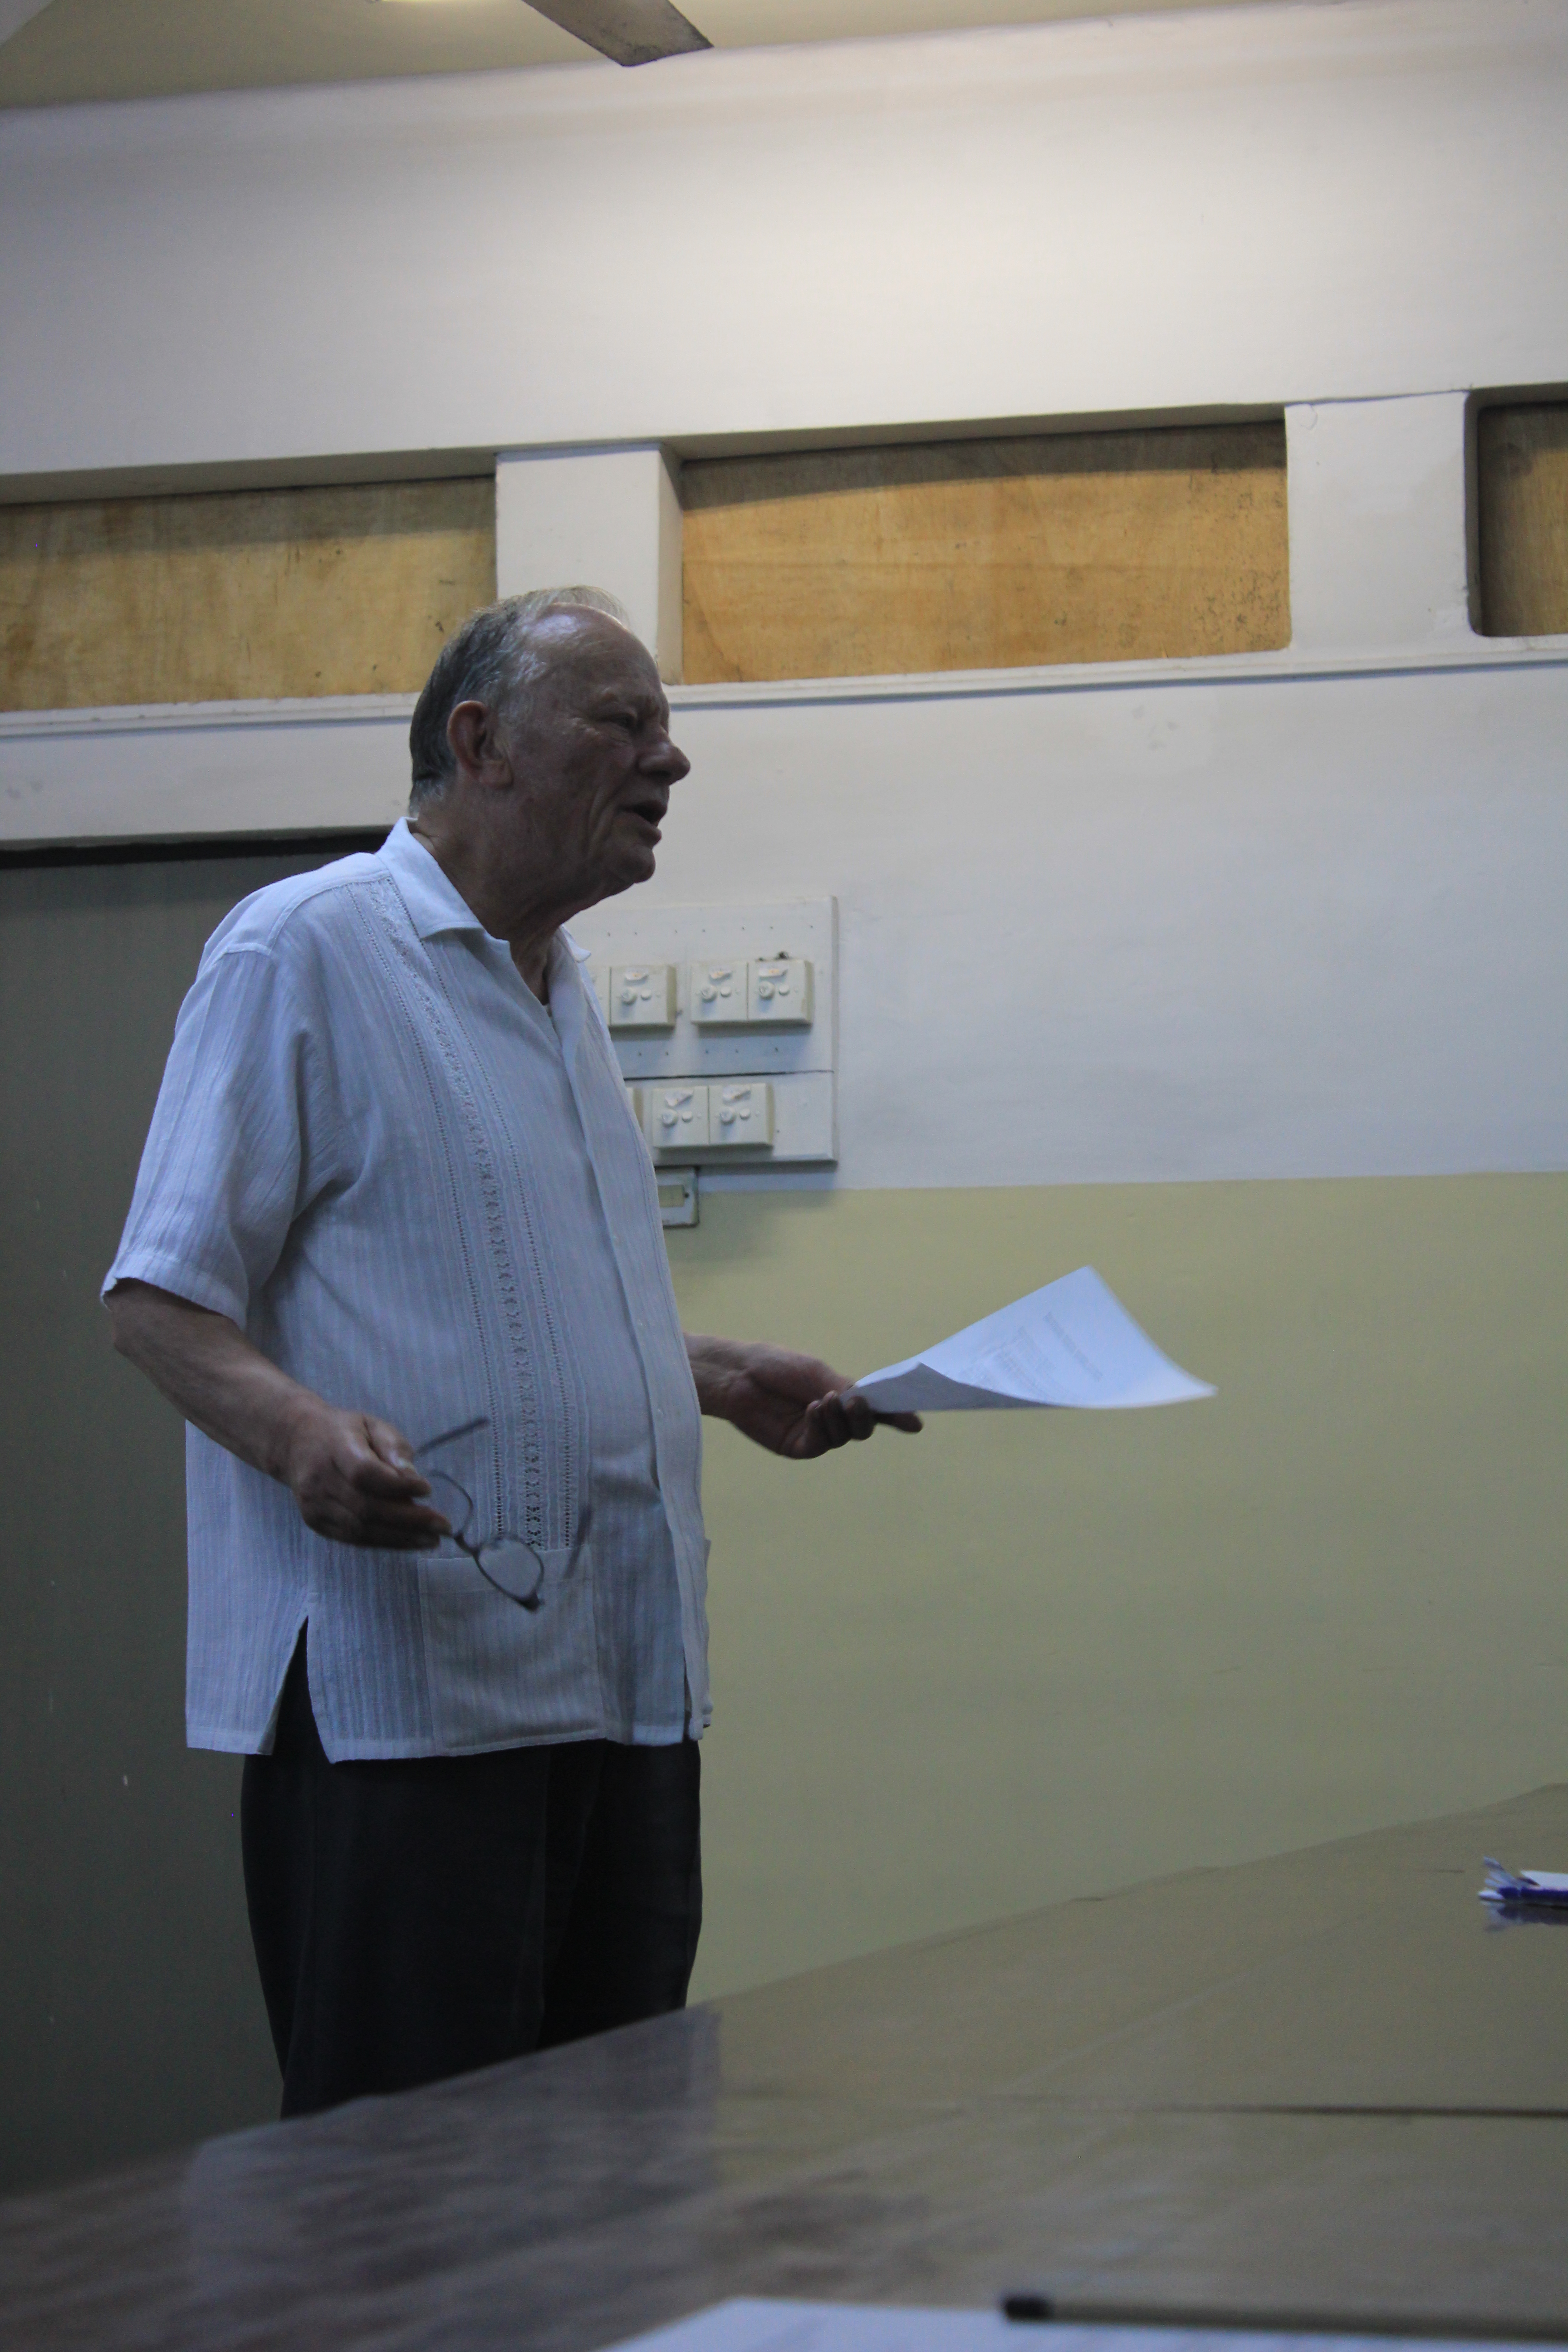 Guest Lecture by John Swales, Professor Emeritus of the University of Michigan, USA